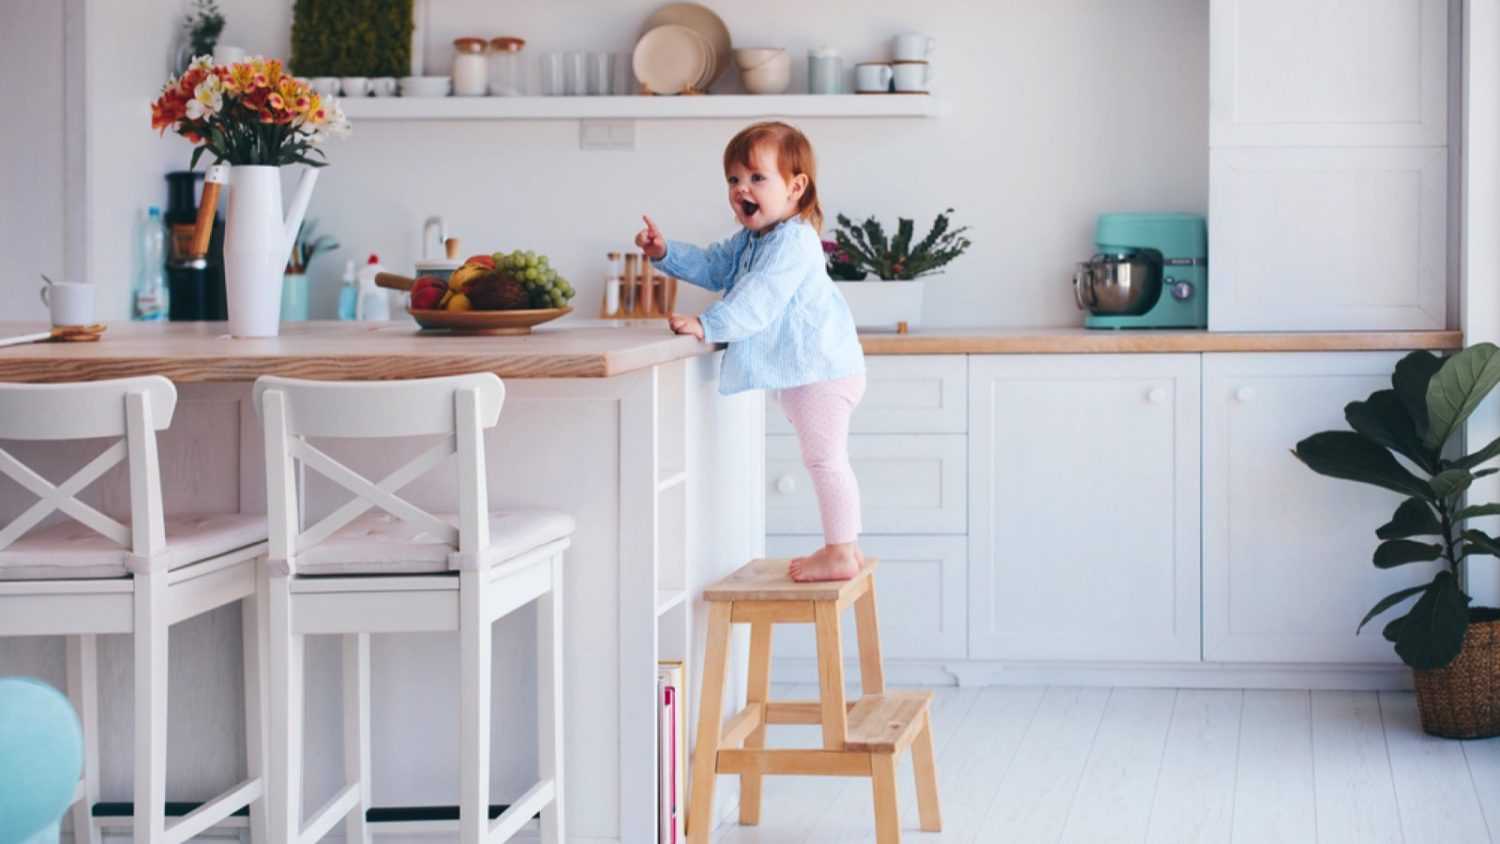 Kid using step stool in kitchen